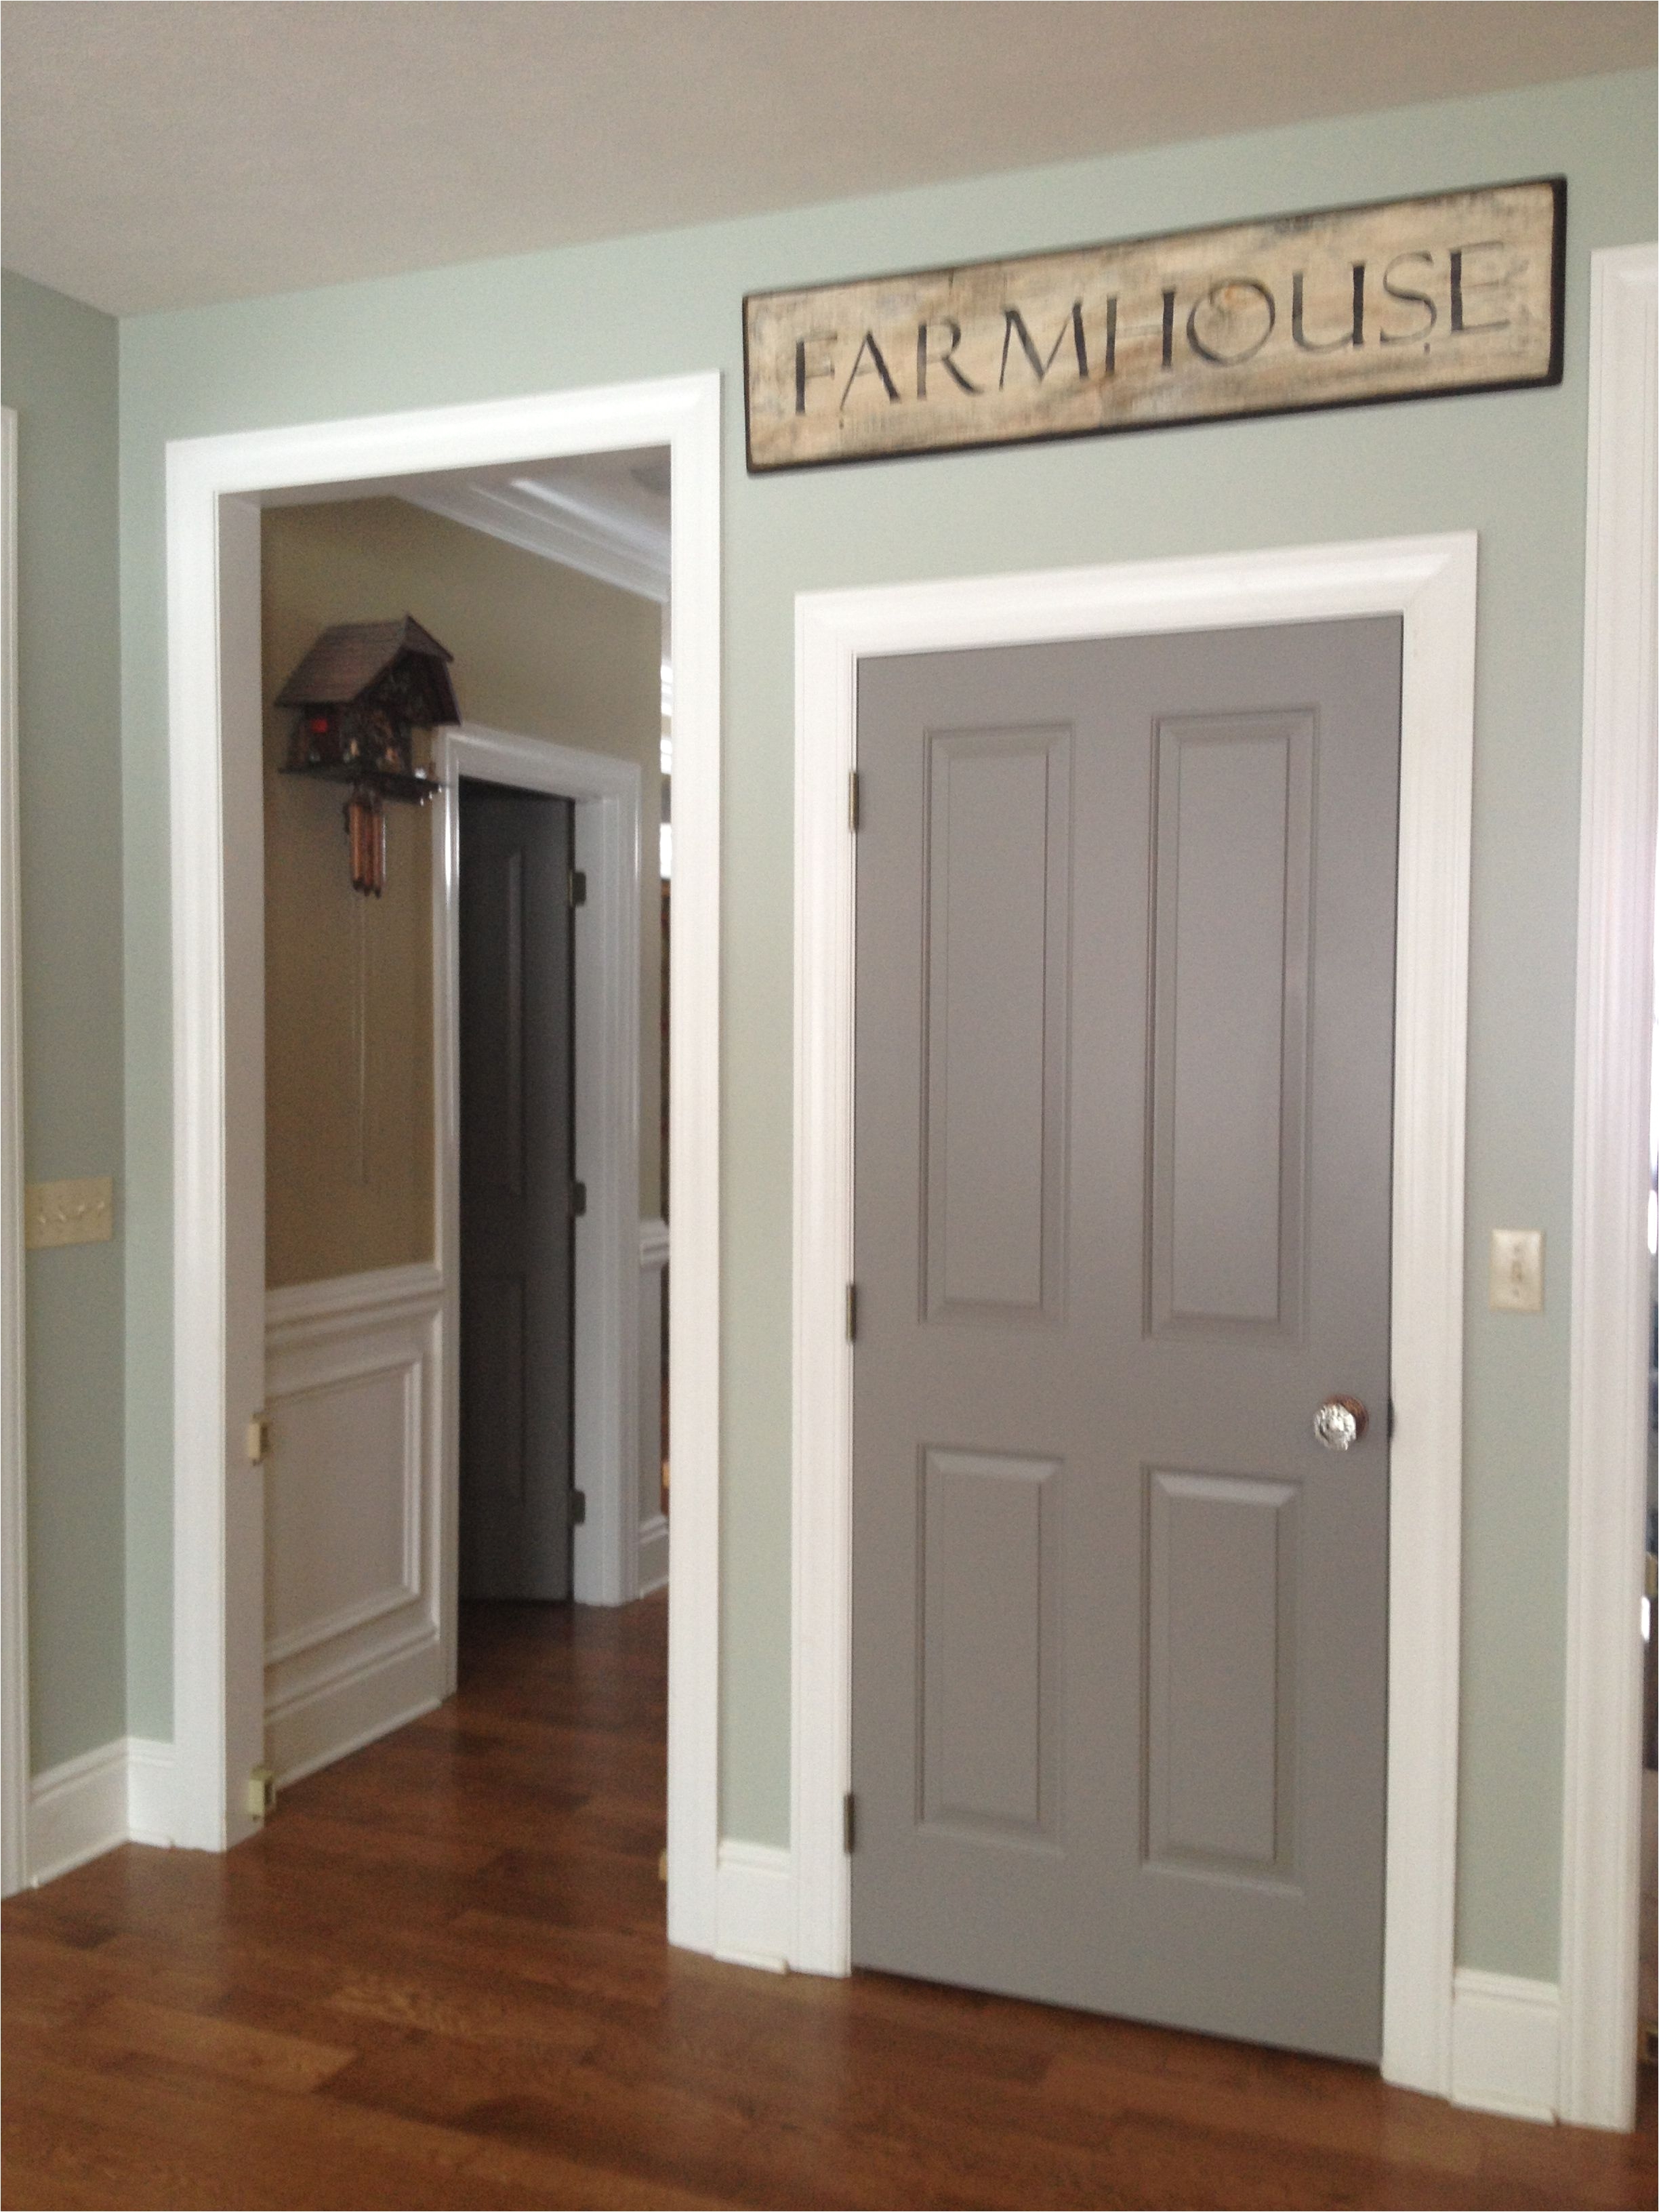 sherwin williams dovetail grey the door color is what i would like to paint the vanity cabinet